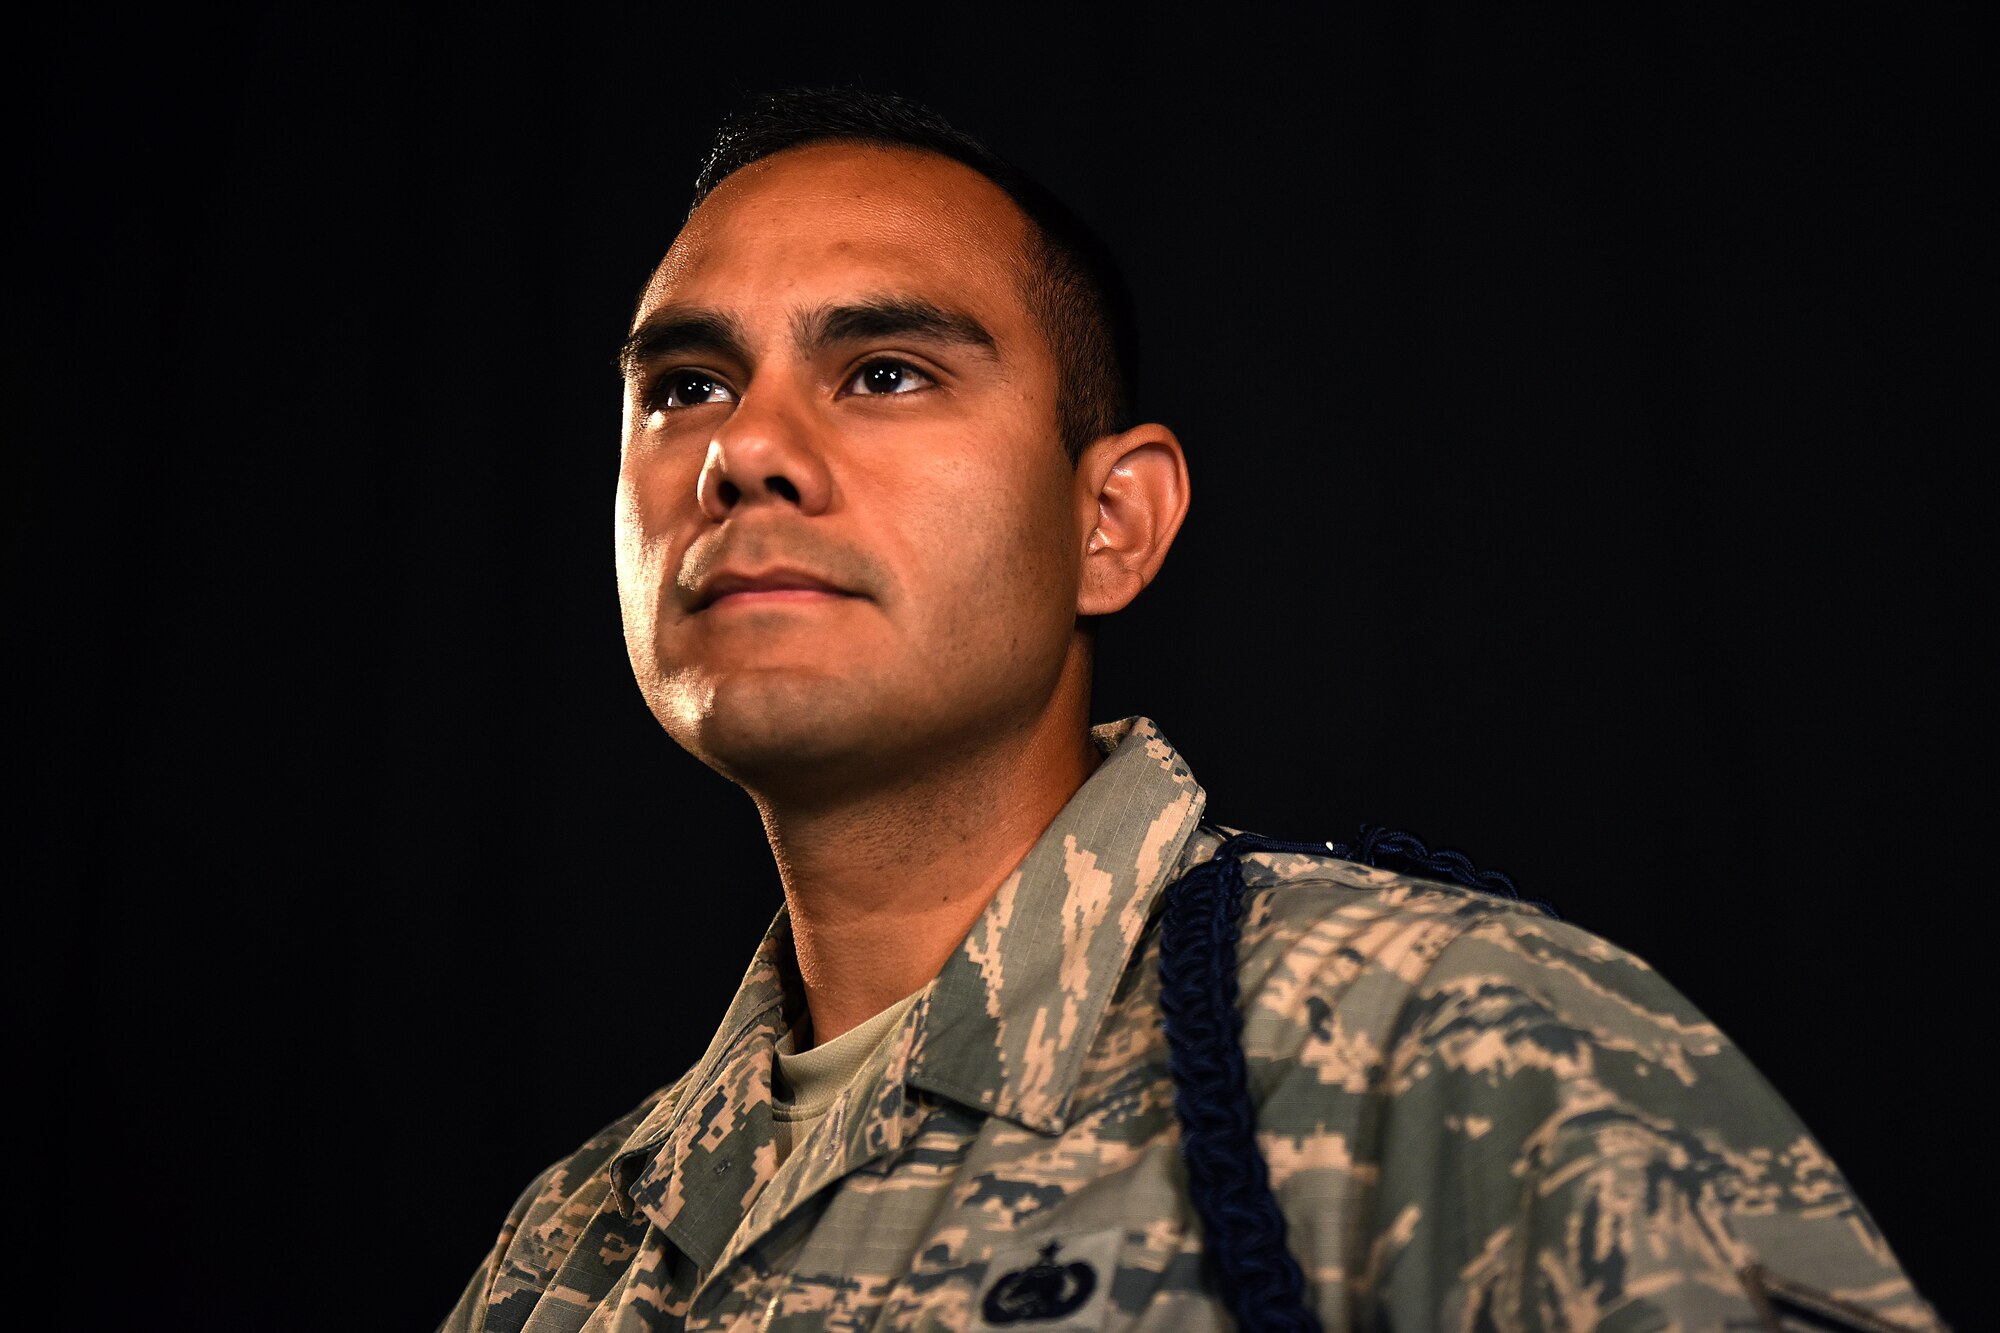 U.S. Air Force Tech. Sgt. Andres Oliva, 17th Training Group military training leader, earns his commission through the senior enlisted leadership commissioning program on Goodfellow Air Force Base, Texas, Oct. 31, 2016. Oliva will return to his previous job before his special duty as a logistic readiness officer. (U.S. Air Force photo by Airman 1st Class Caelynn Ferguson/Released)